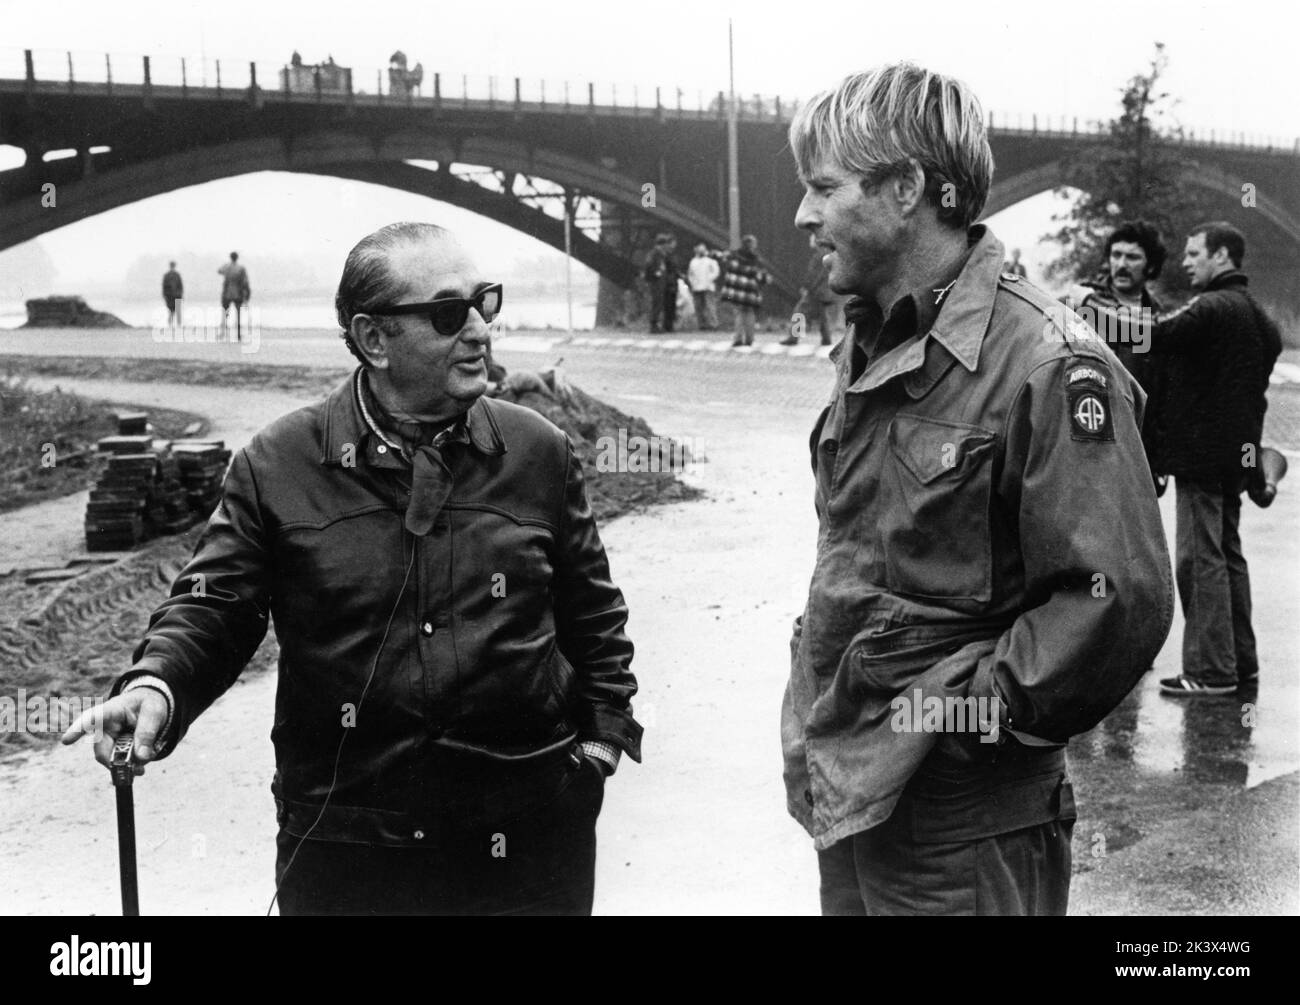 Producer JOSEPH E. LEVINE and ROBERT REDFORD on set location candid in Holland during filming of A BRIDGE TOO FAR 1977 director RICHARD ATTENBOROUGH screenplay William Goldman based on the book by Cornelius Ryan USA - UK co-production Joseph E. Levine Productions / United Artists Stock Photo